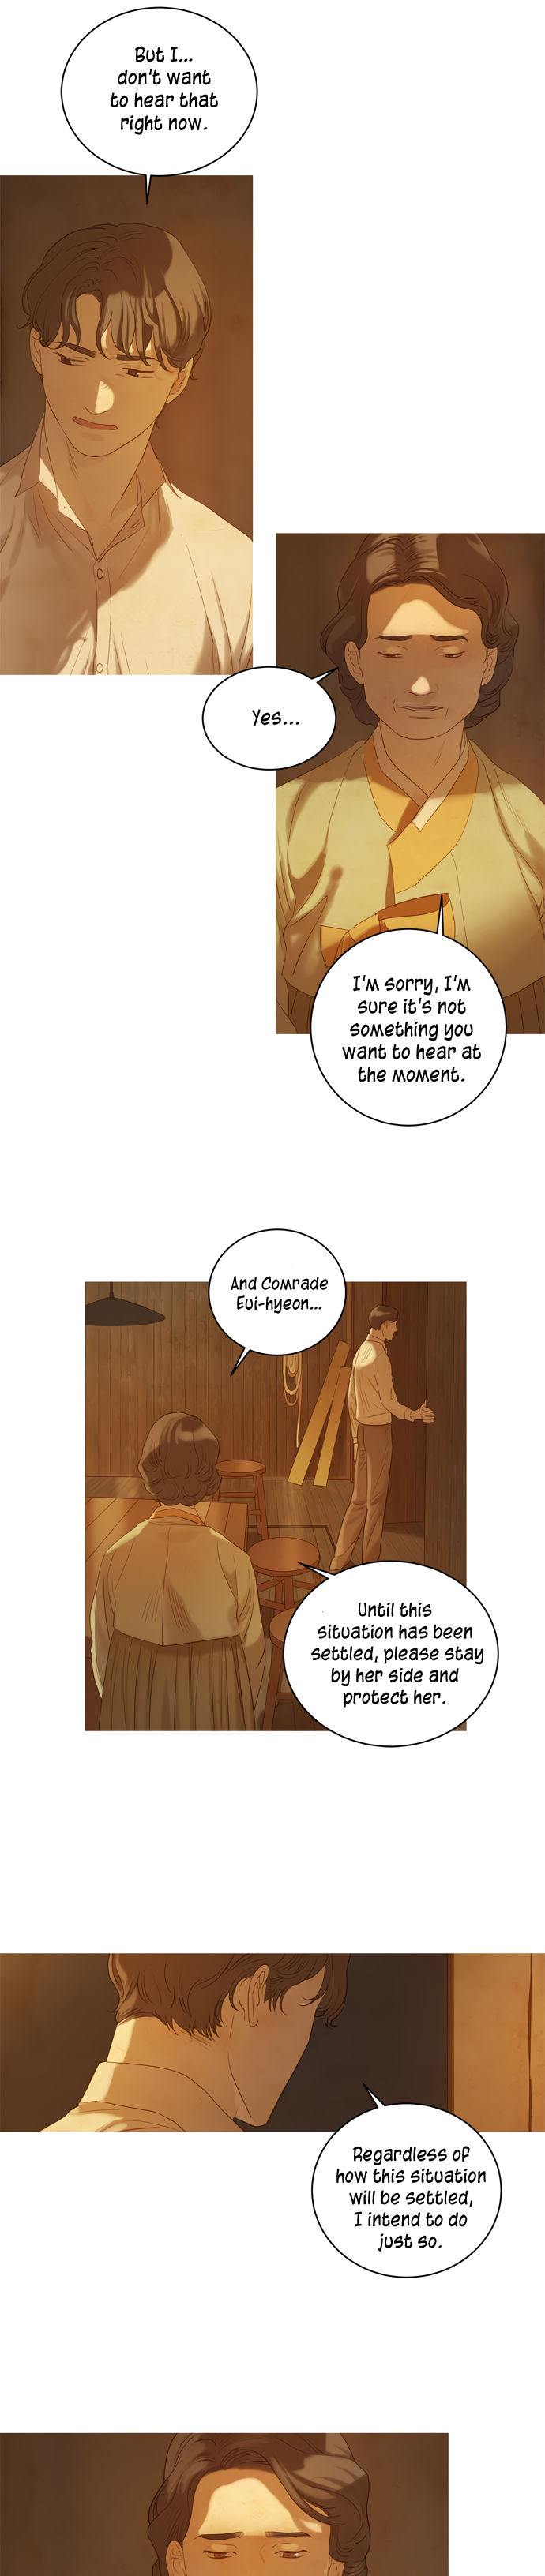 Gorae Byul - The Gyeongseong Mermaid - Chapter 19 Page 26